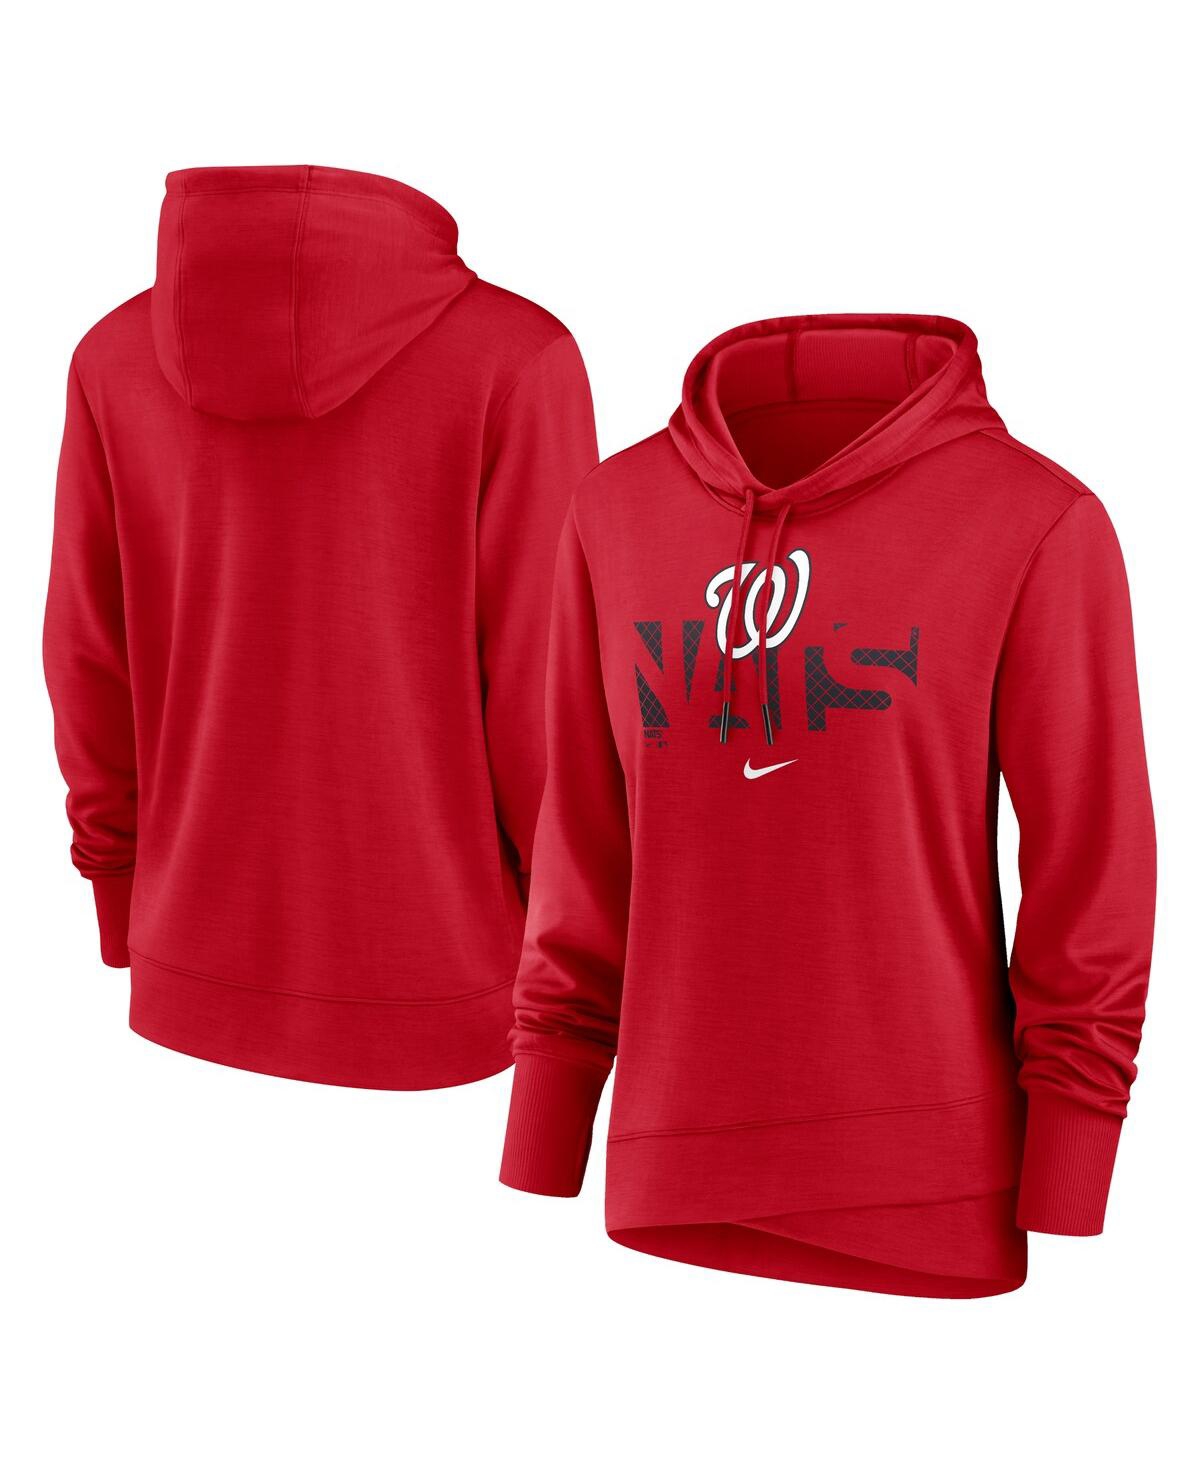 Shop Nike Women's  Red Washington Nationals Diamond Knockout Performance Pullover Hoodie